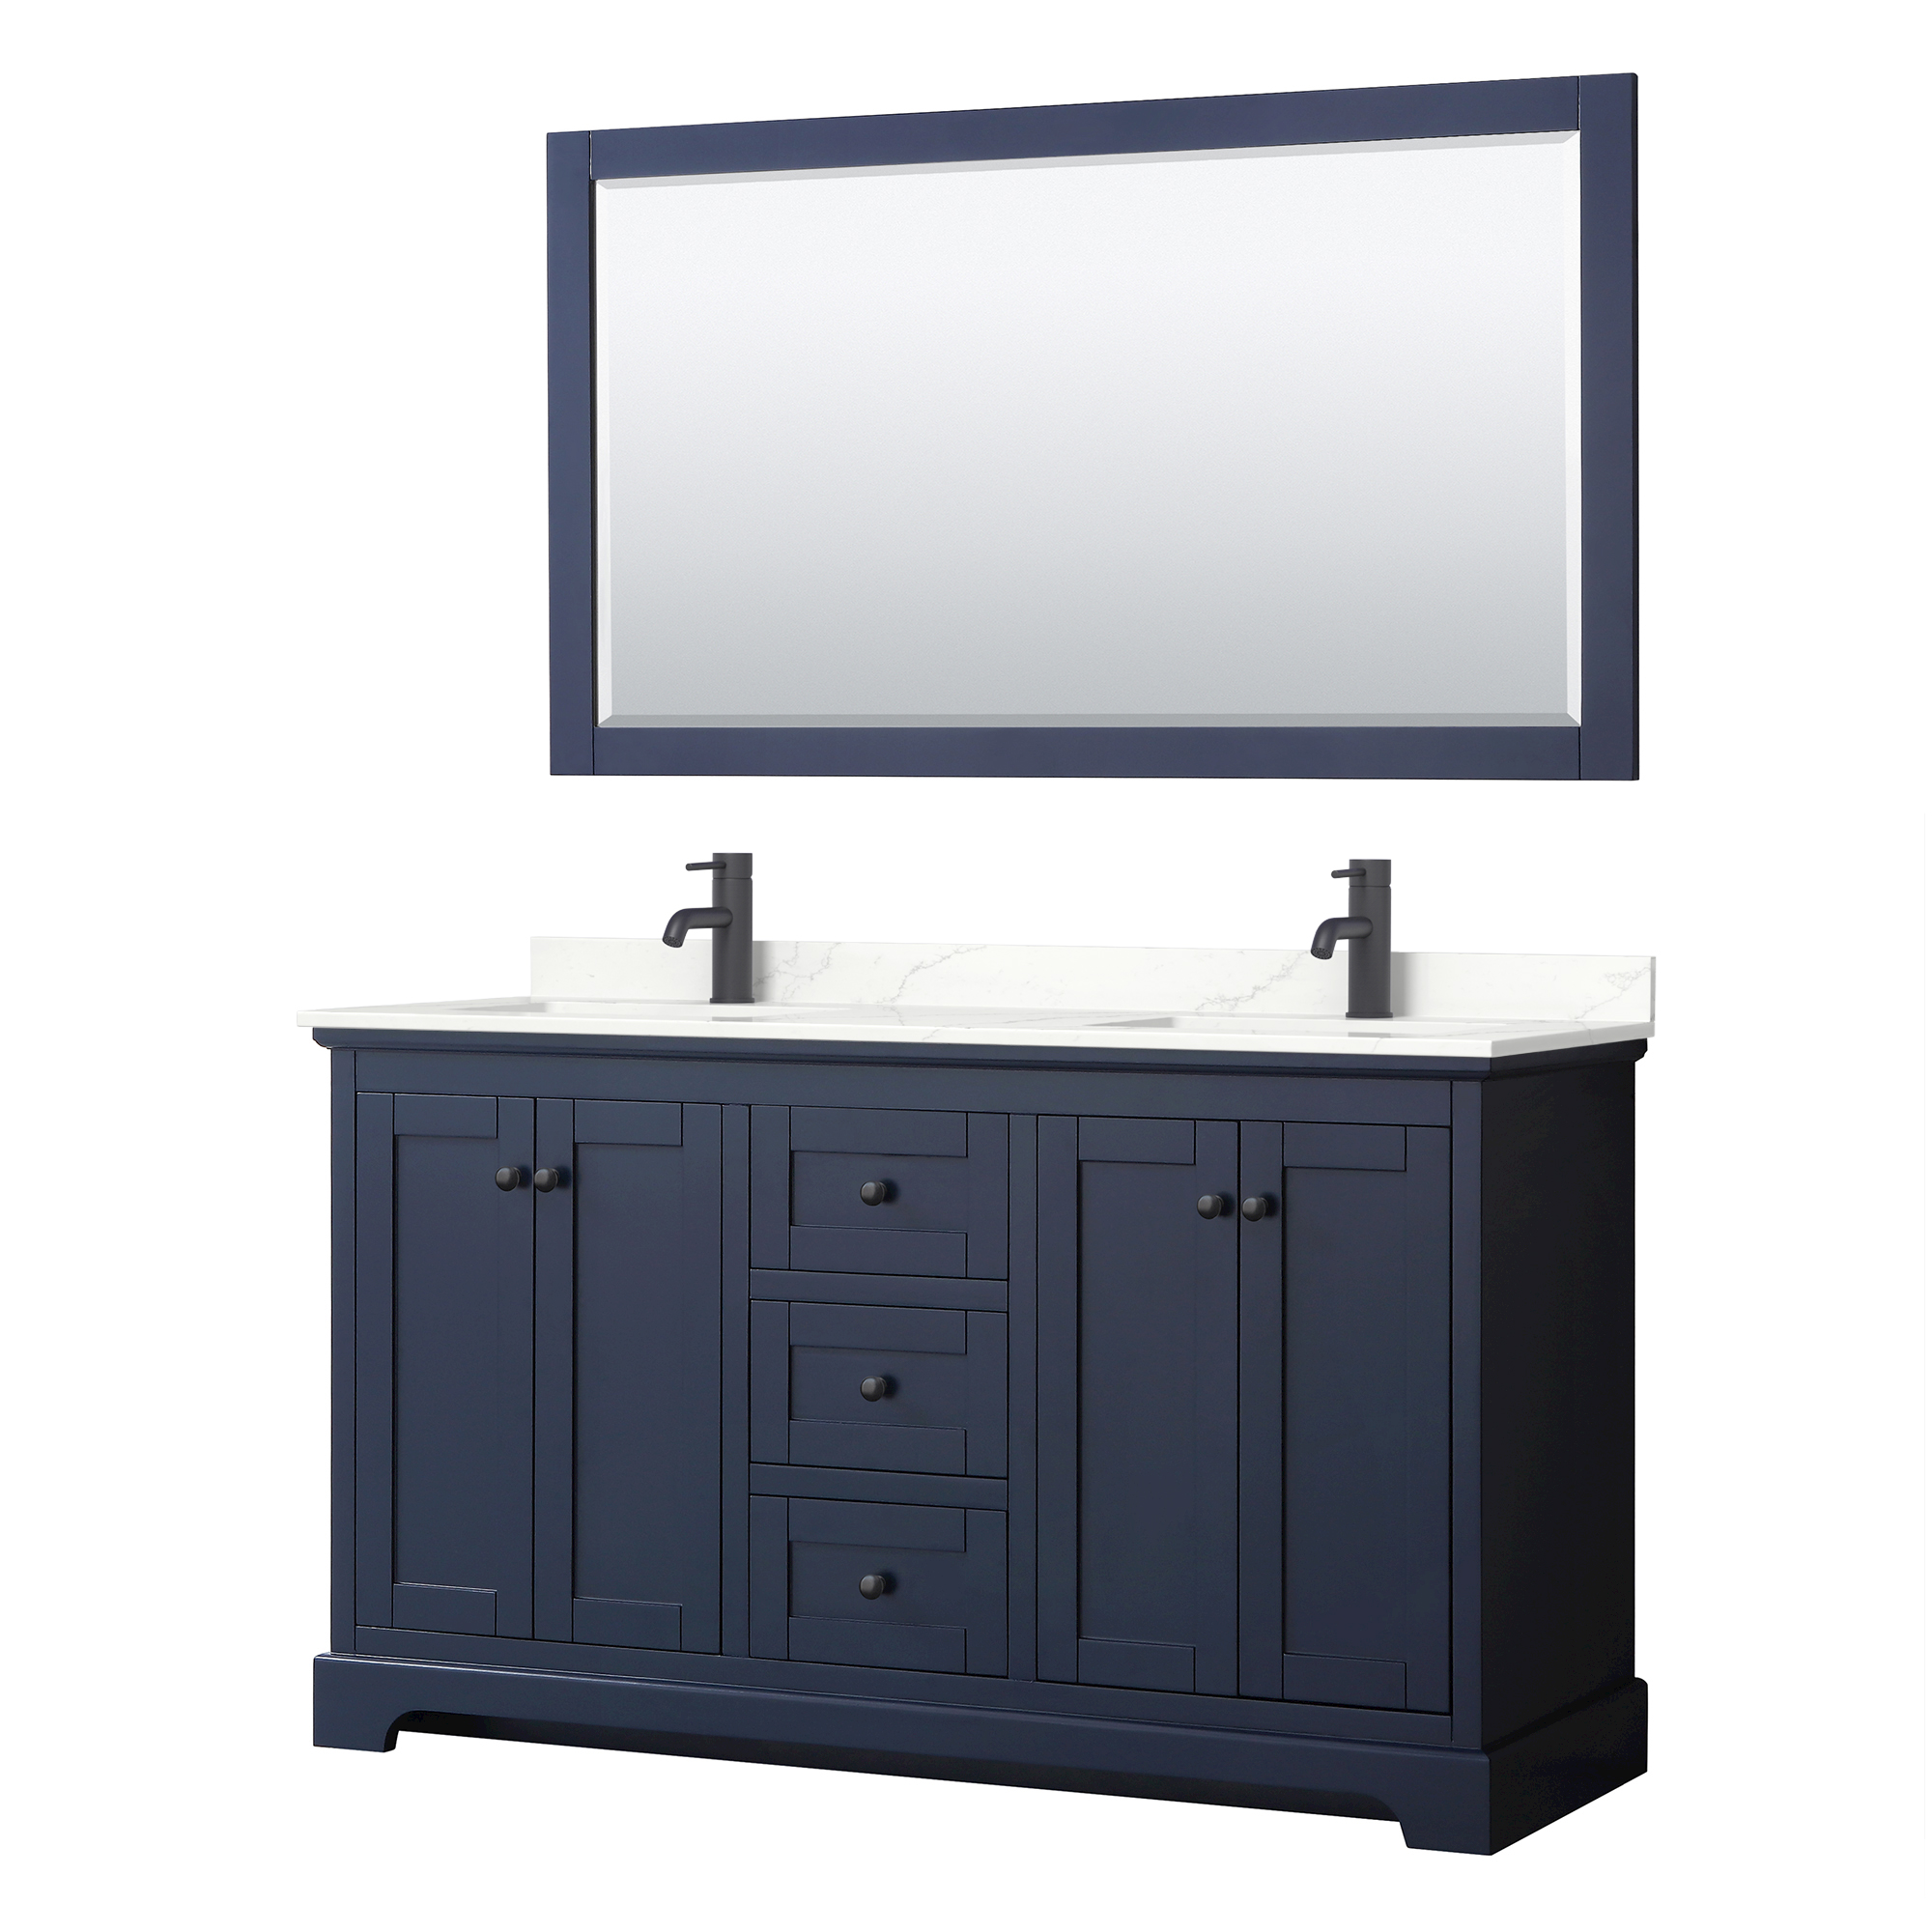 avery 60" double bathroom vanity by wyndham collection - dark blue